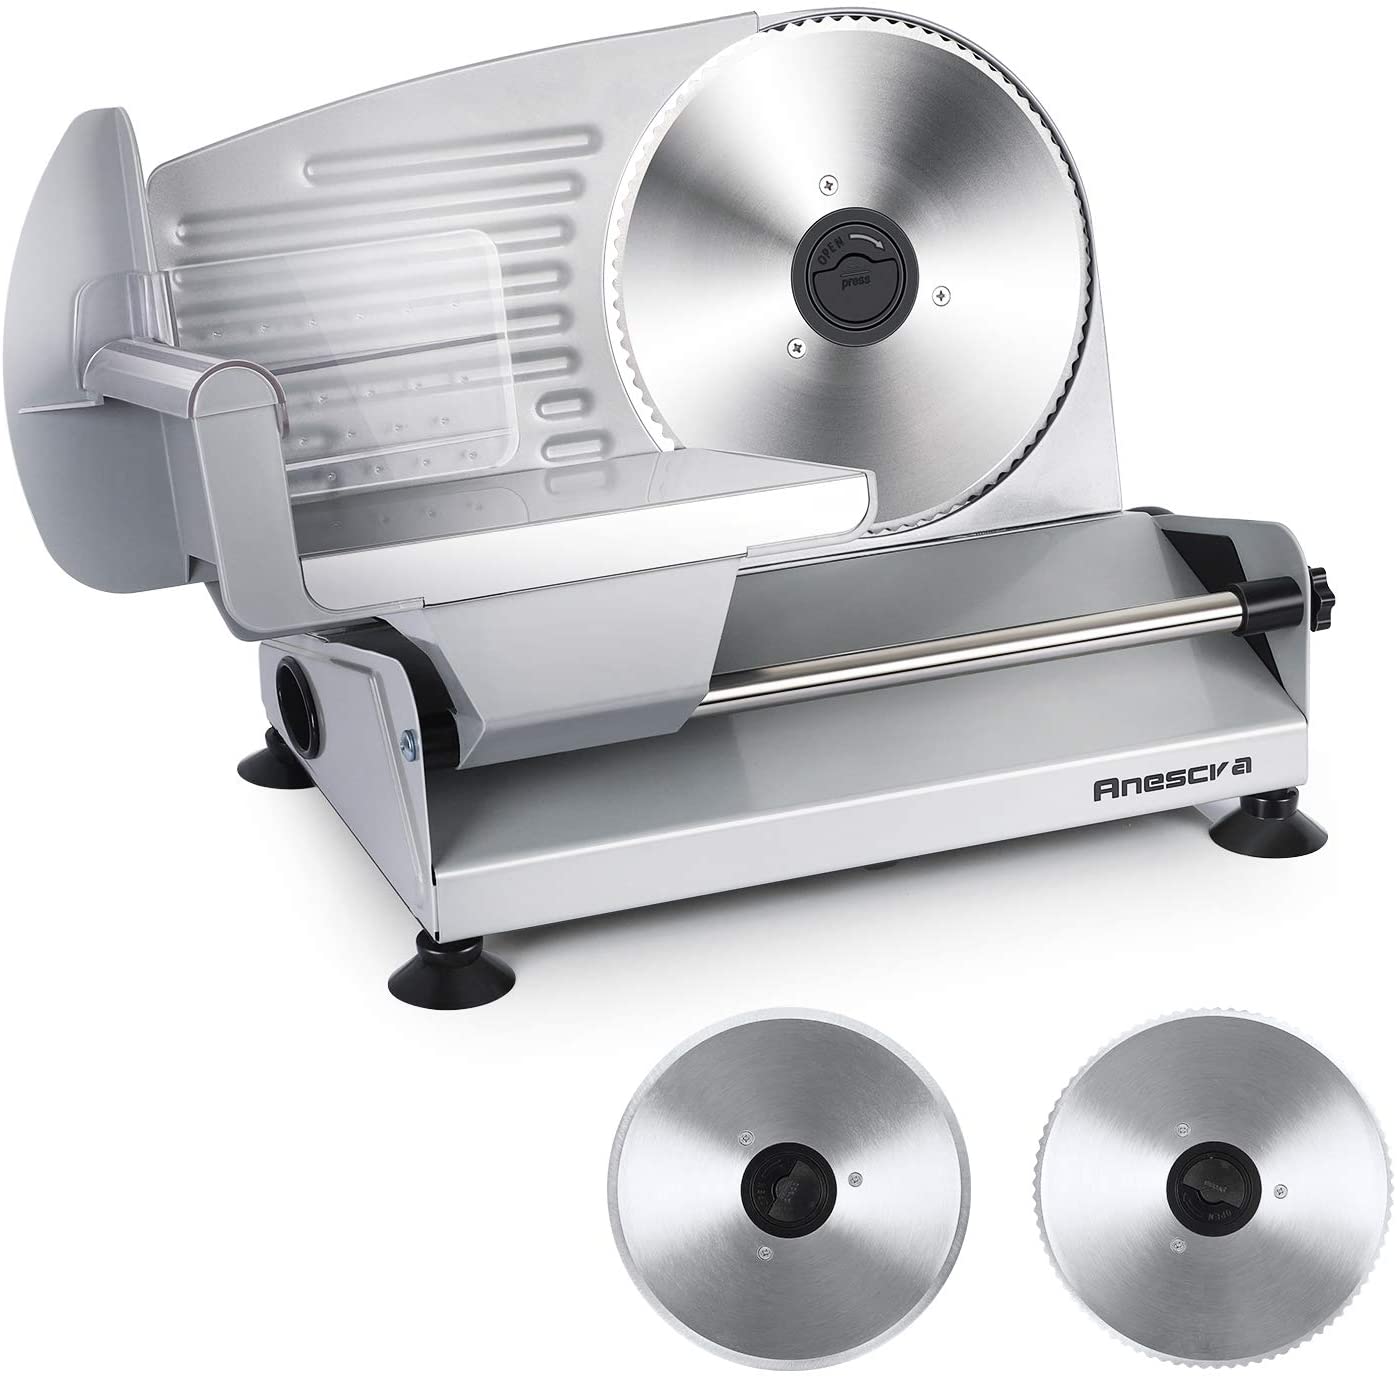 Anescra Compact Electric Meat Slicer